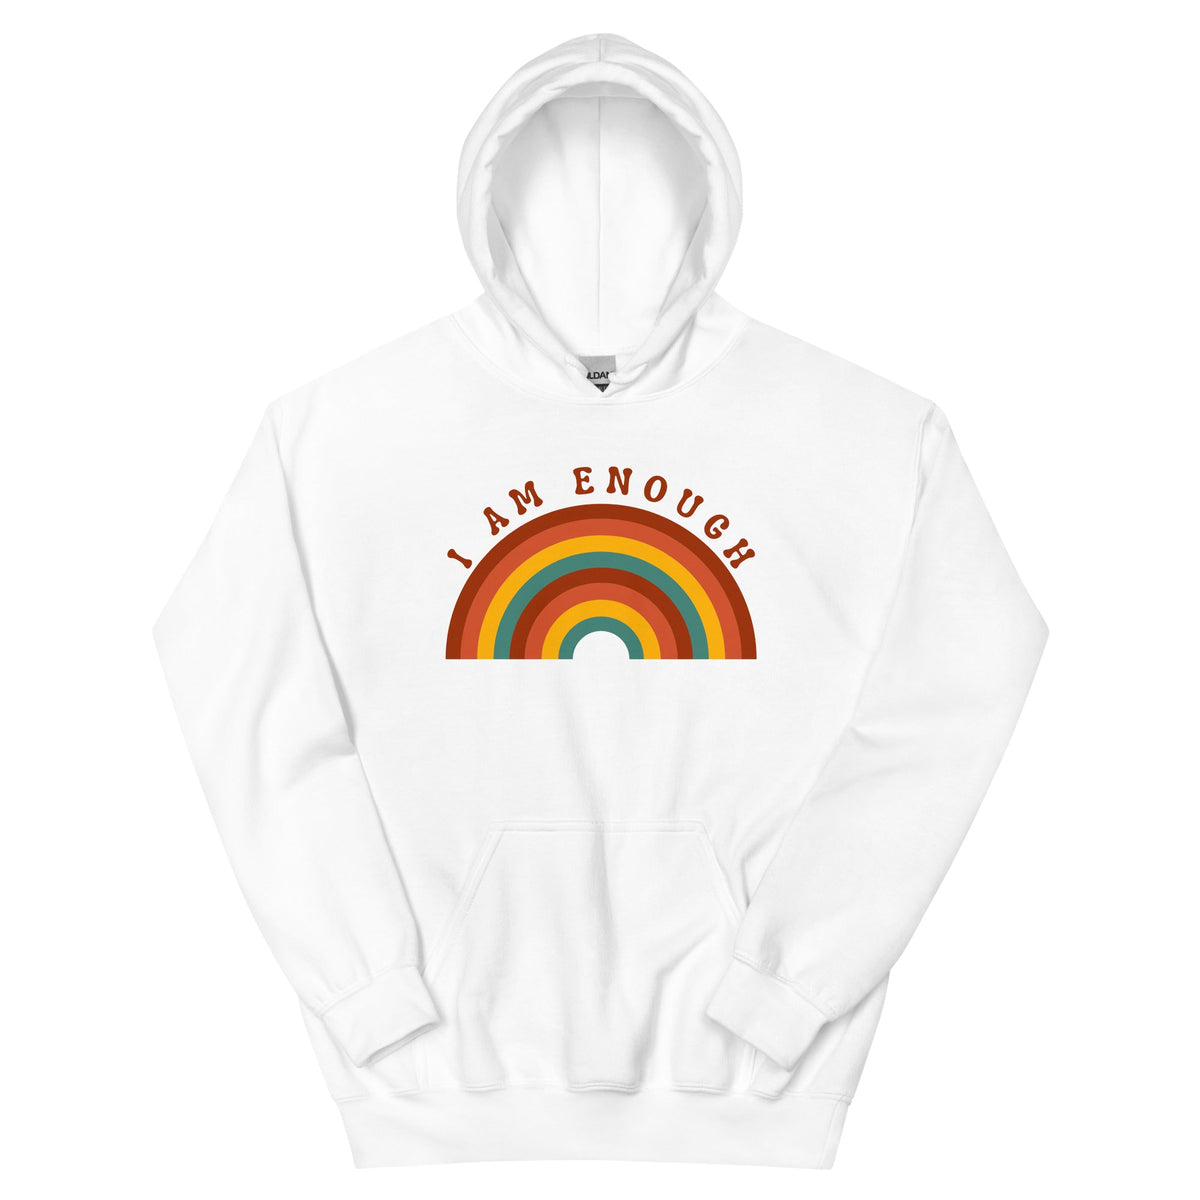 I AM ENOUGH RAINBOW - Motivational Hoodie for Women - 9